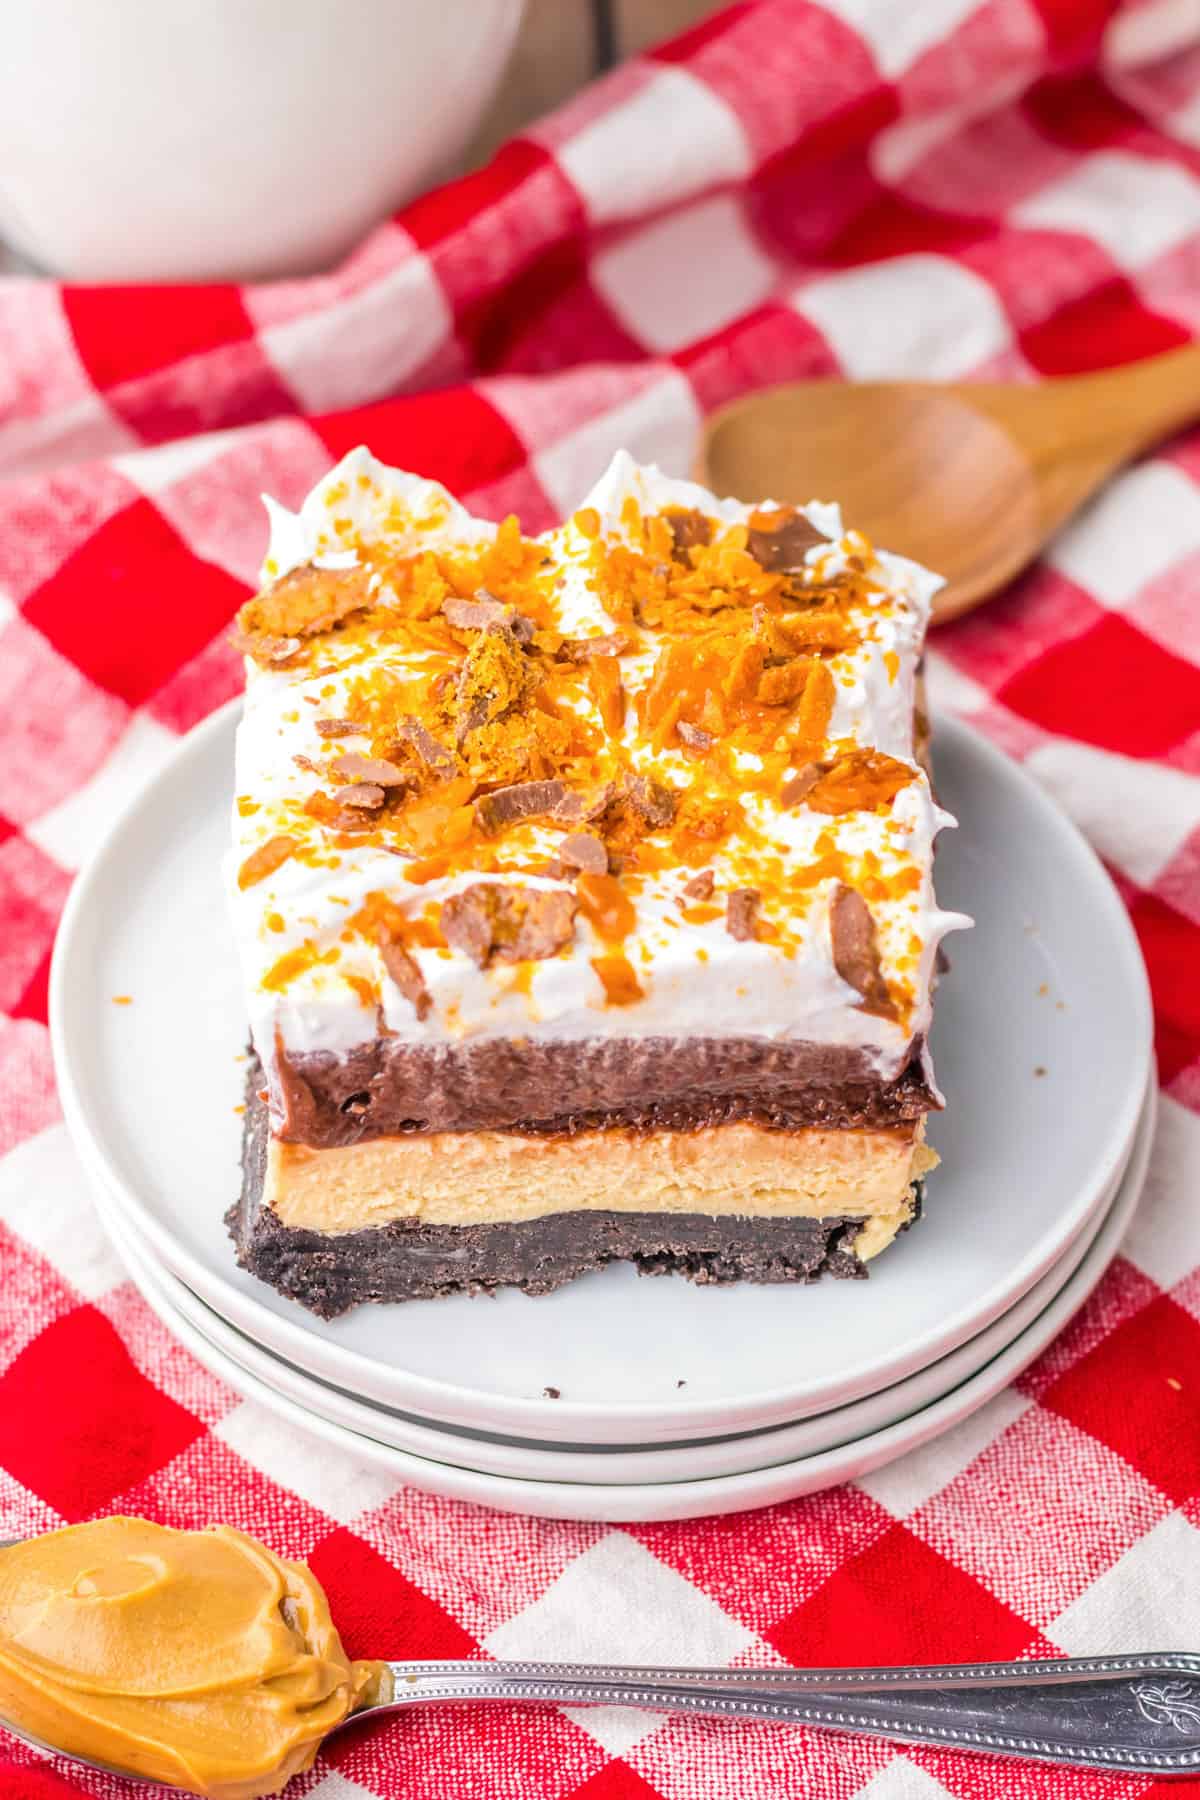 Butterfinger delight layered dessert topped with whipped topping and crushed butterfinger candy bars.